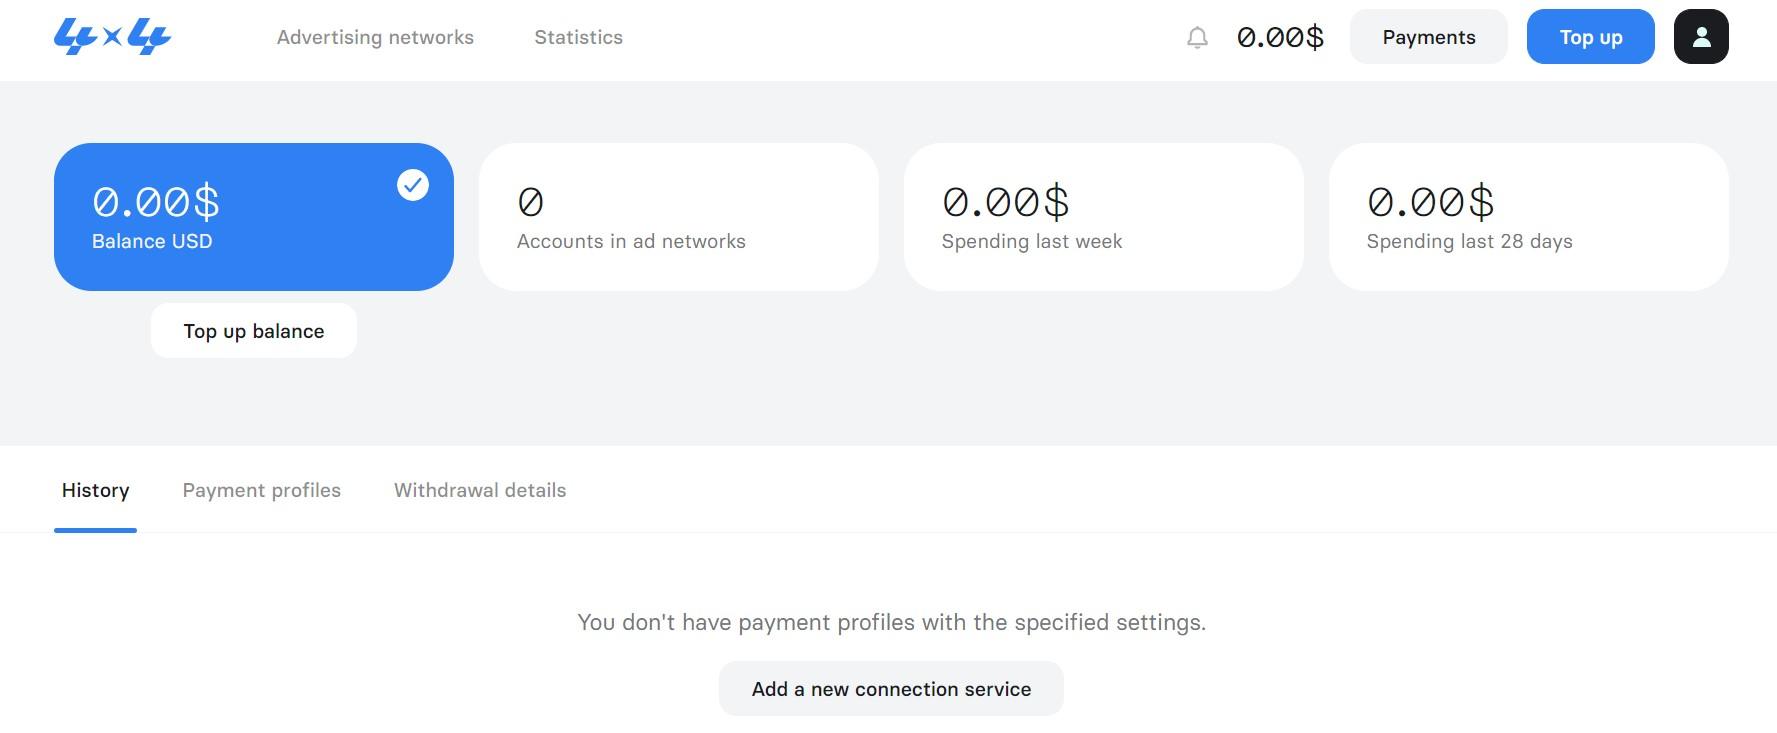 4×4.io Virtual Card Issuance Service Review